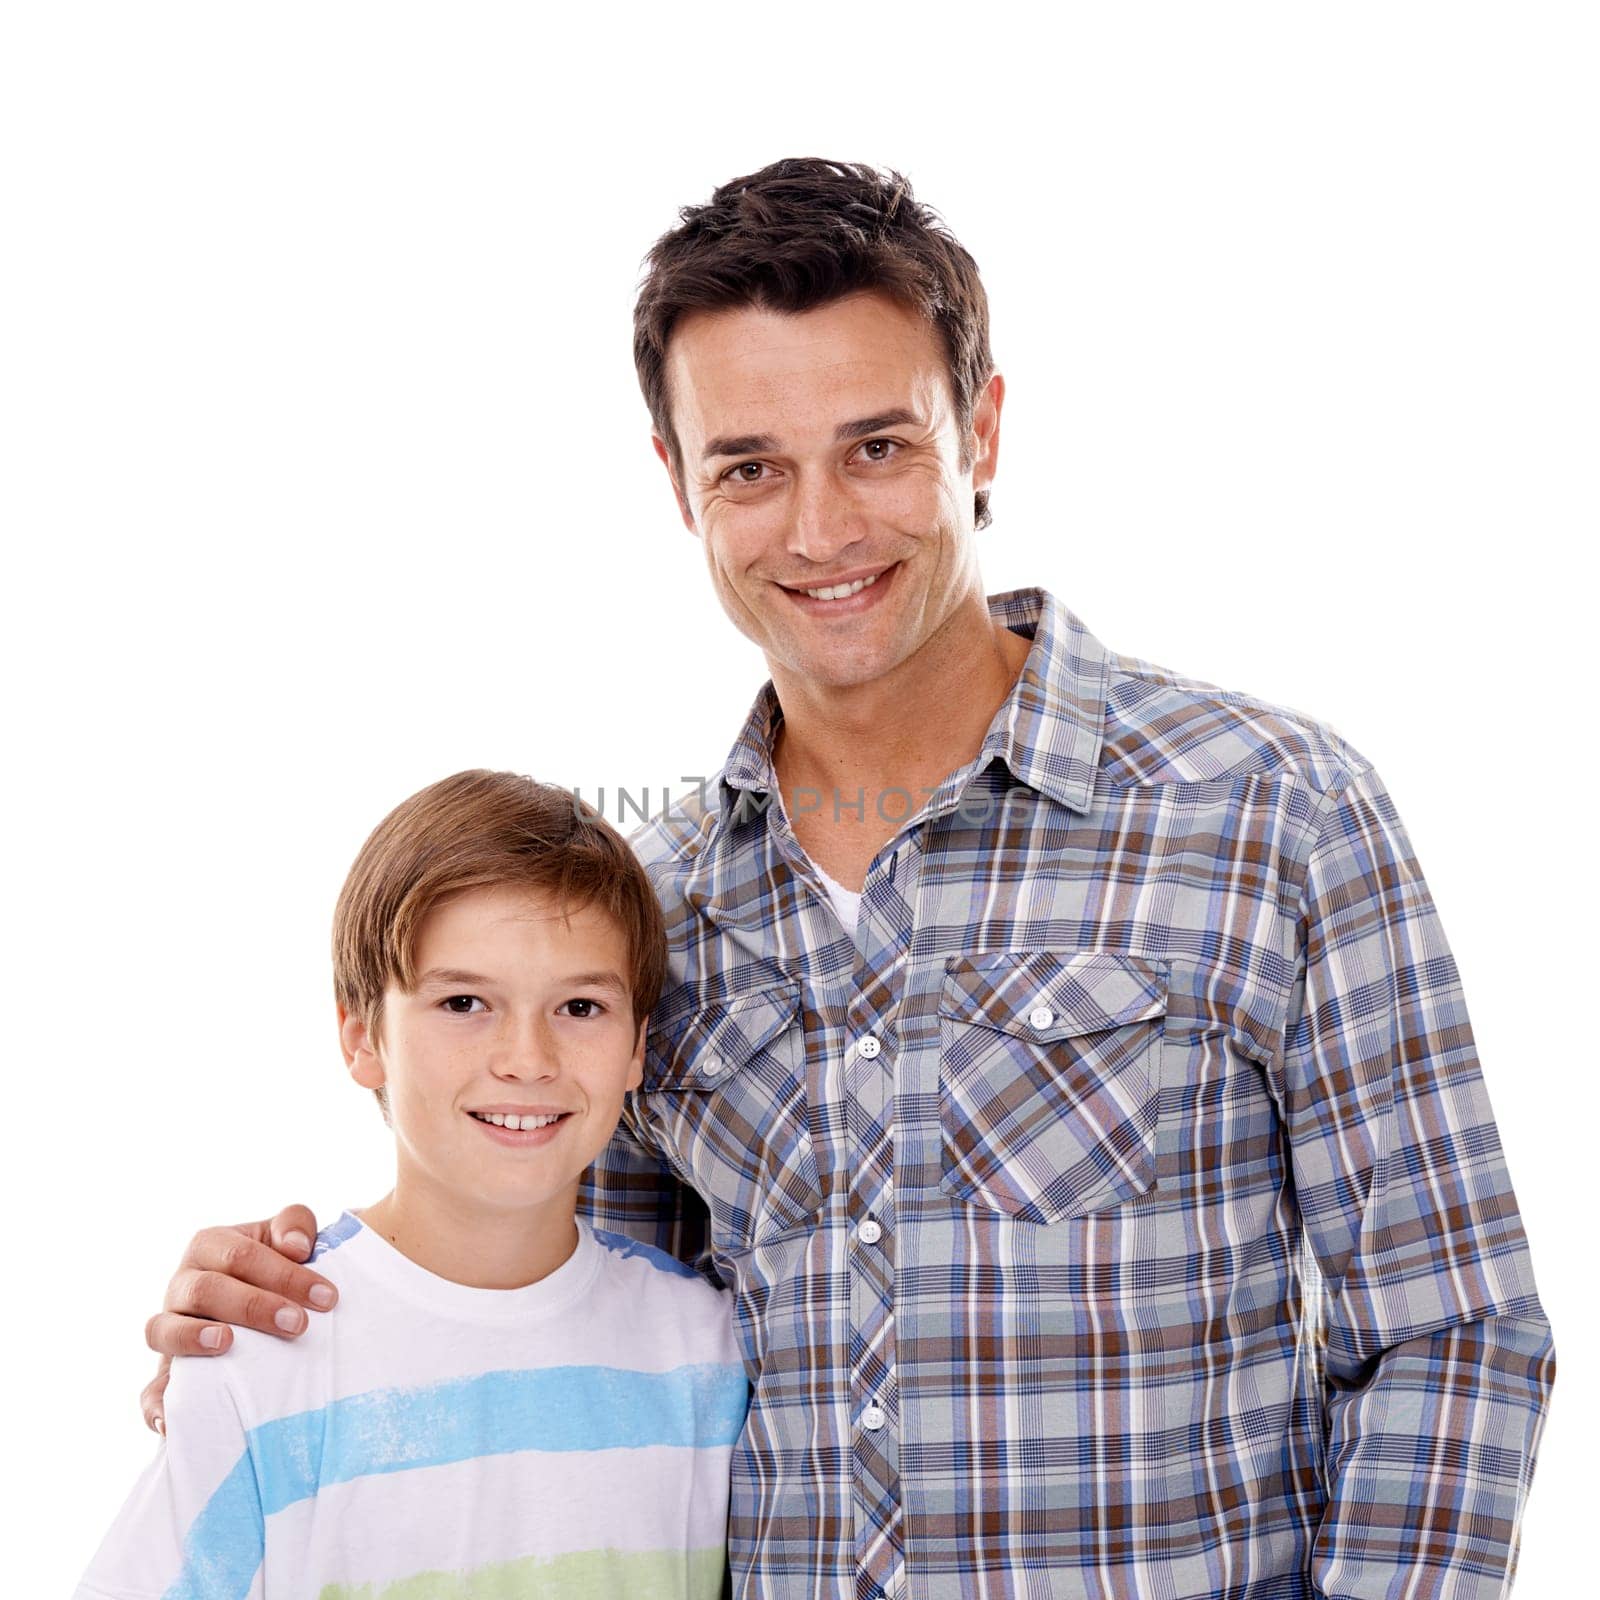 One day hell look just like me. Studio portrait of a loving father and son isolated on white